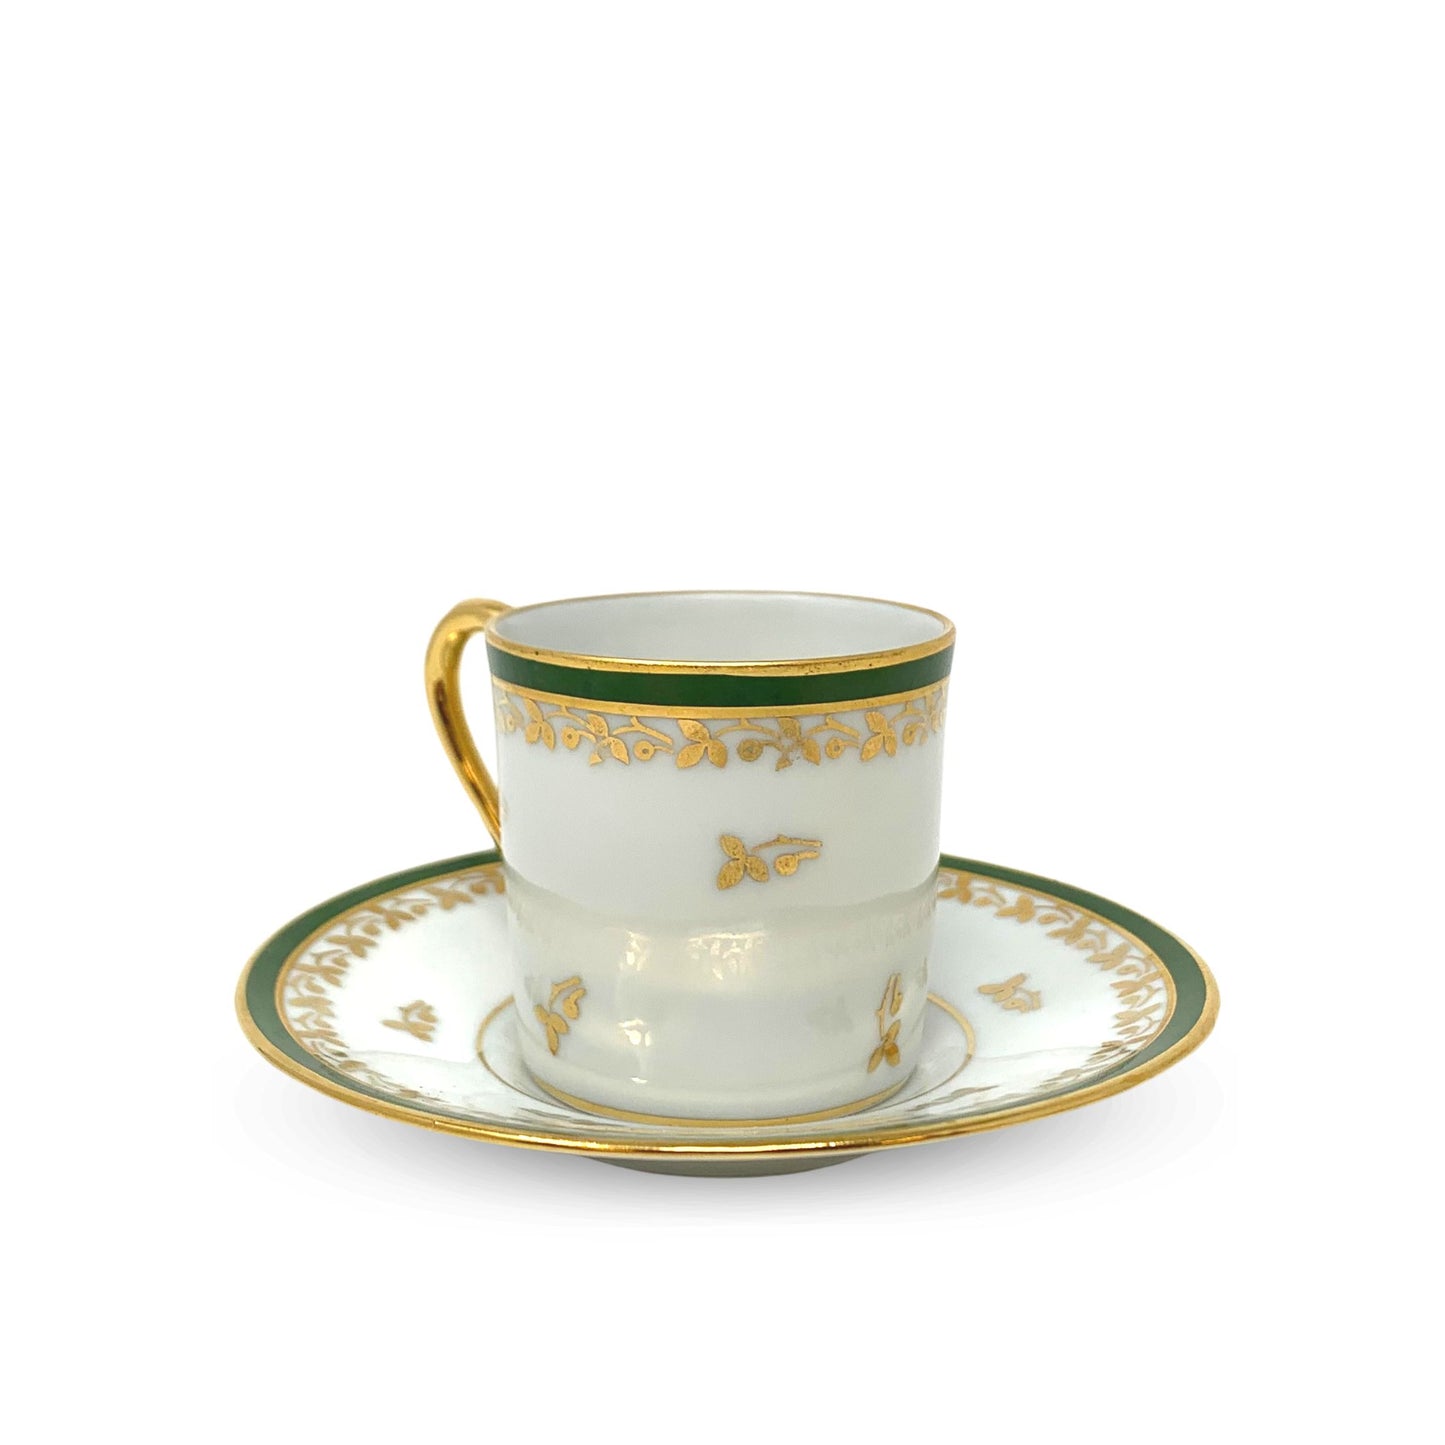 Fontanille & Marraud Limoges Napoleon Espresso Cup and Saucer